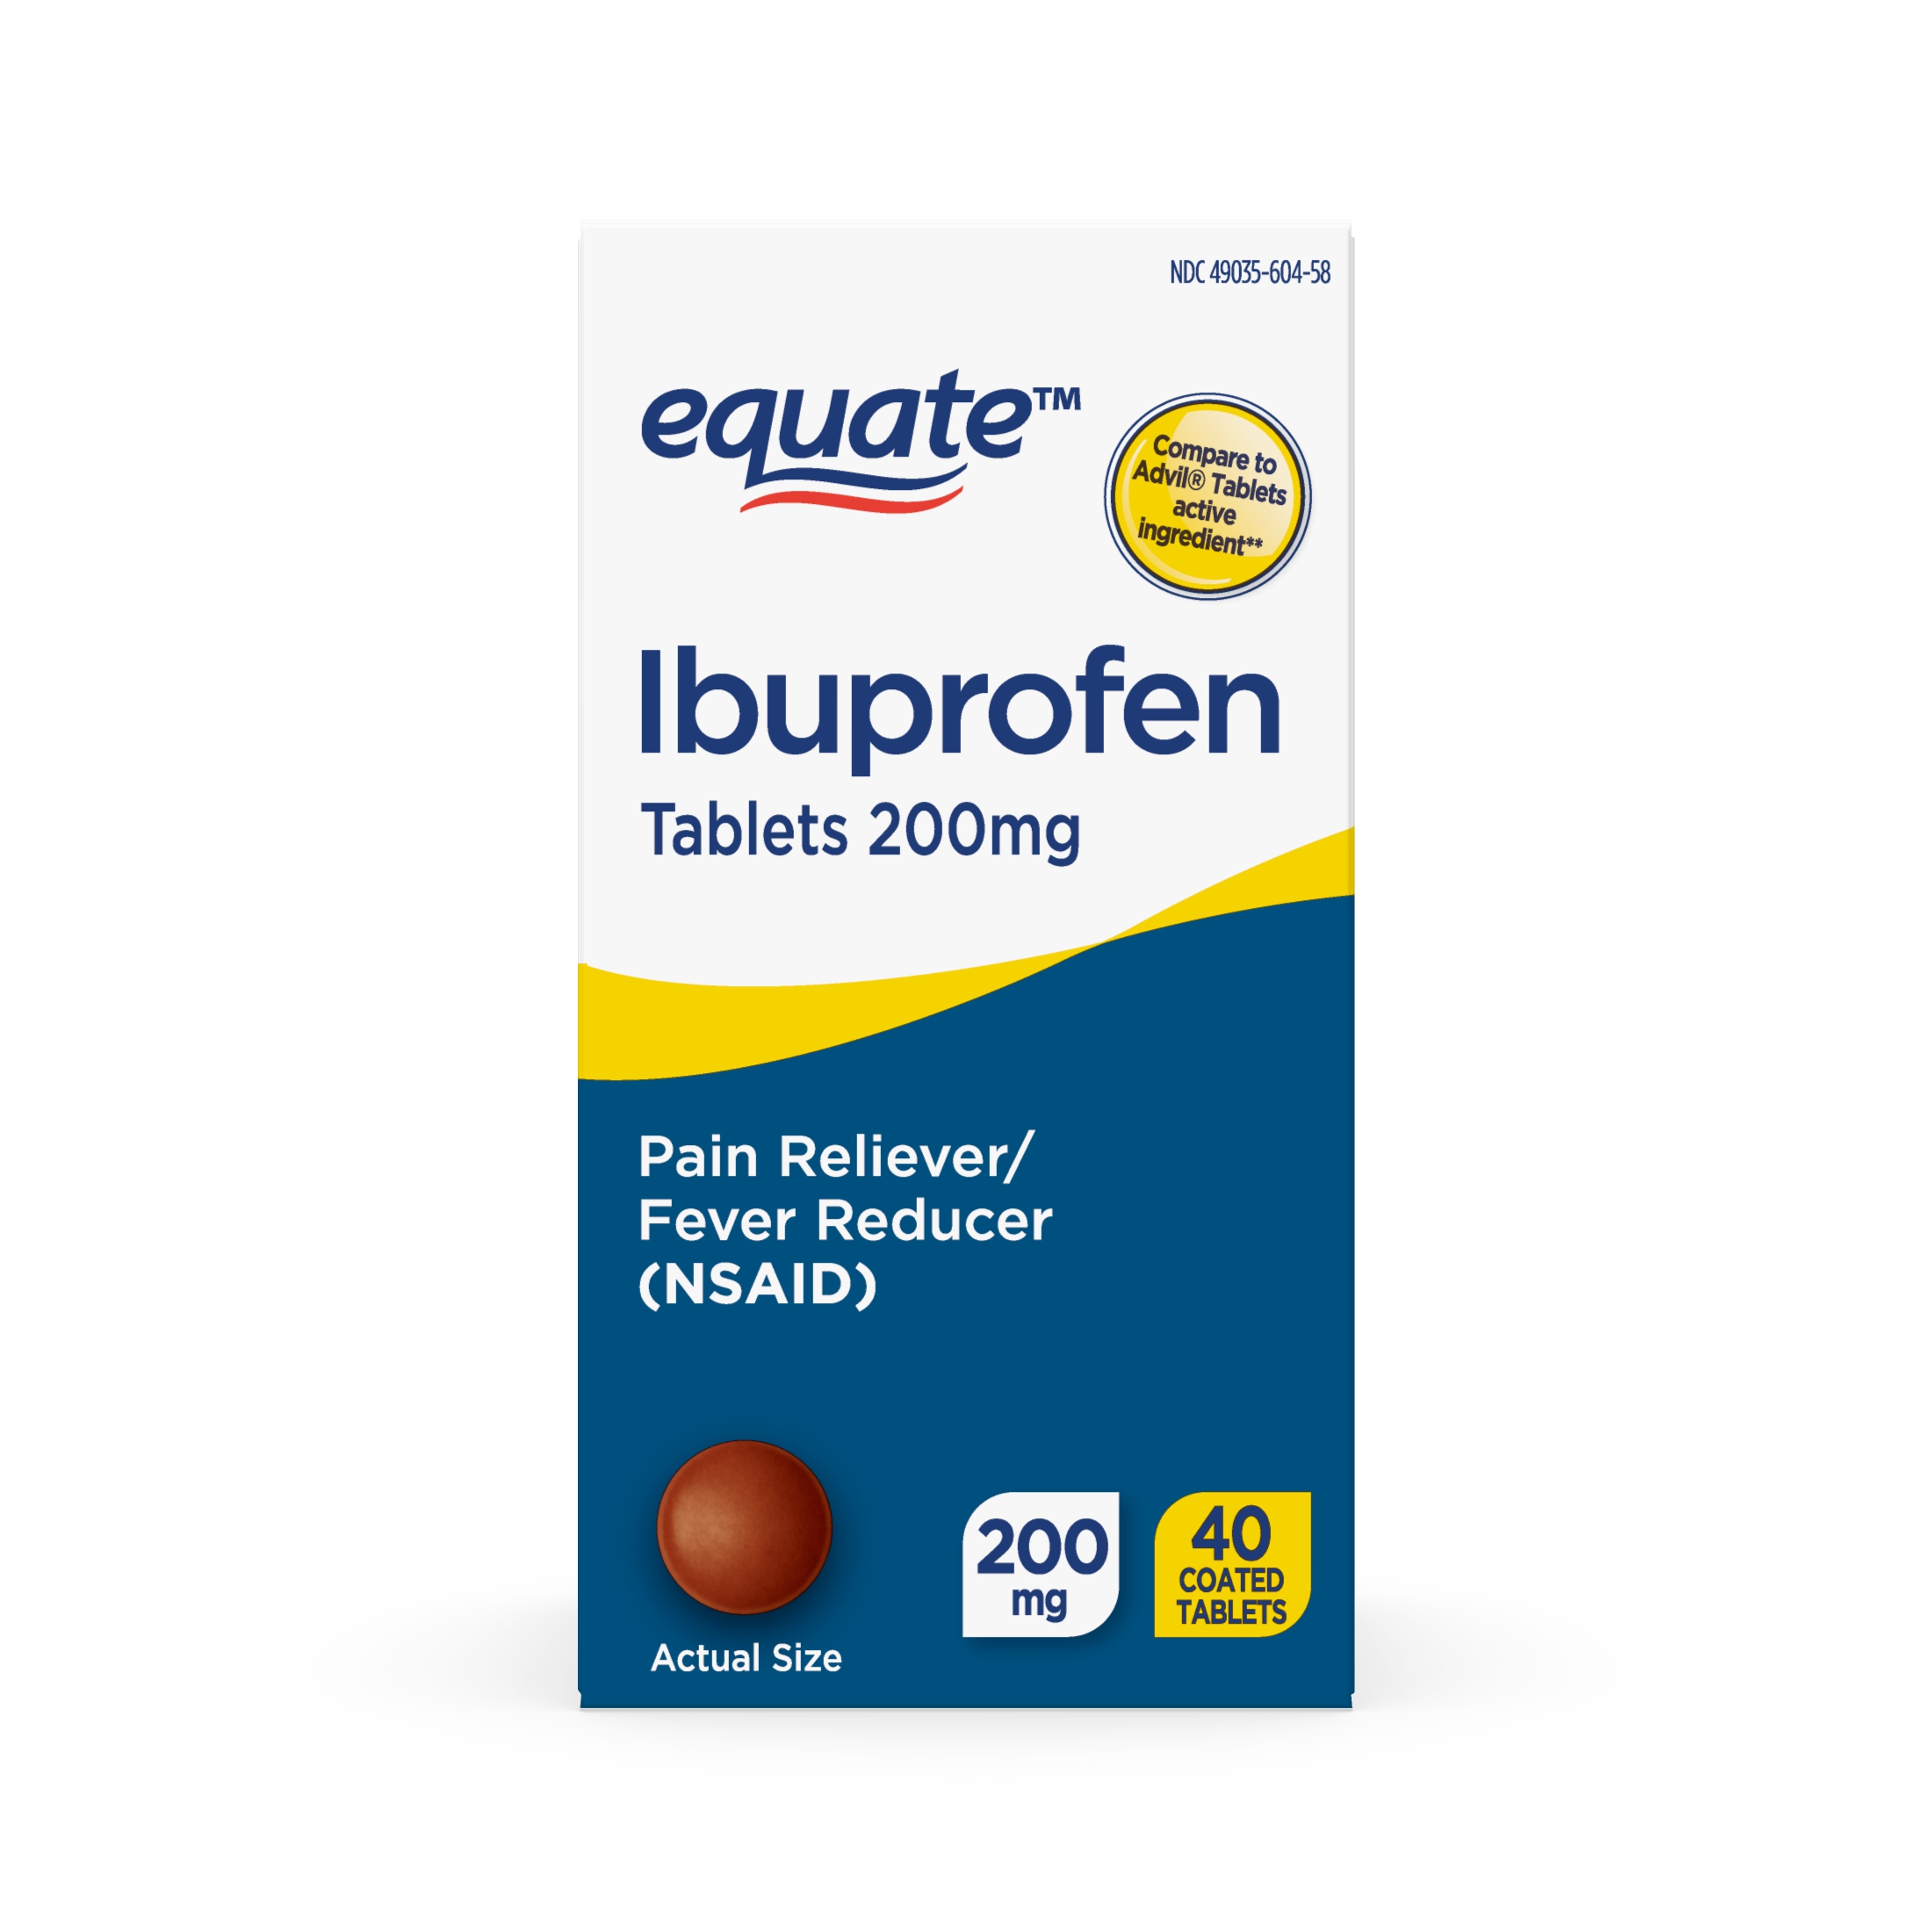 Equate Ibuprofen Tablets 200 mg, Pain Reliever/Fever Reducer, 40 Count - image 1 of 8